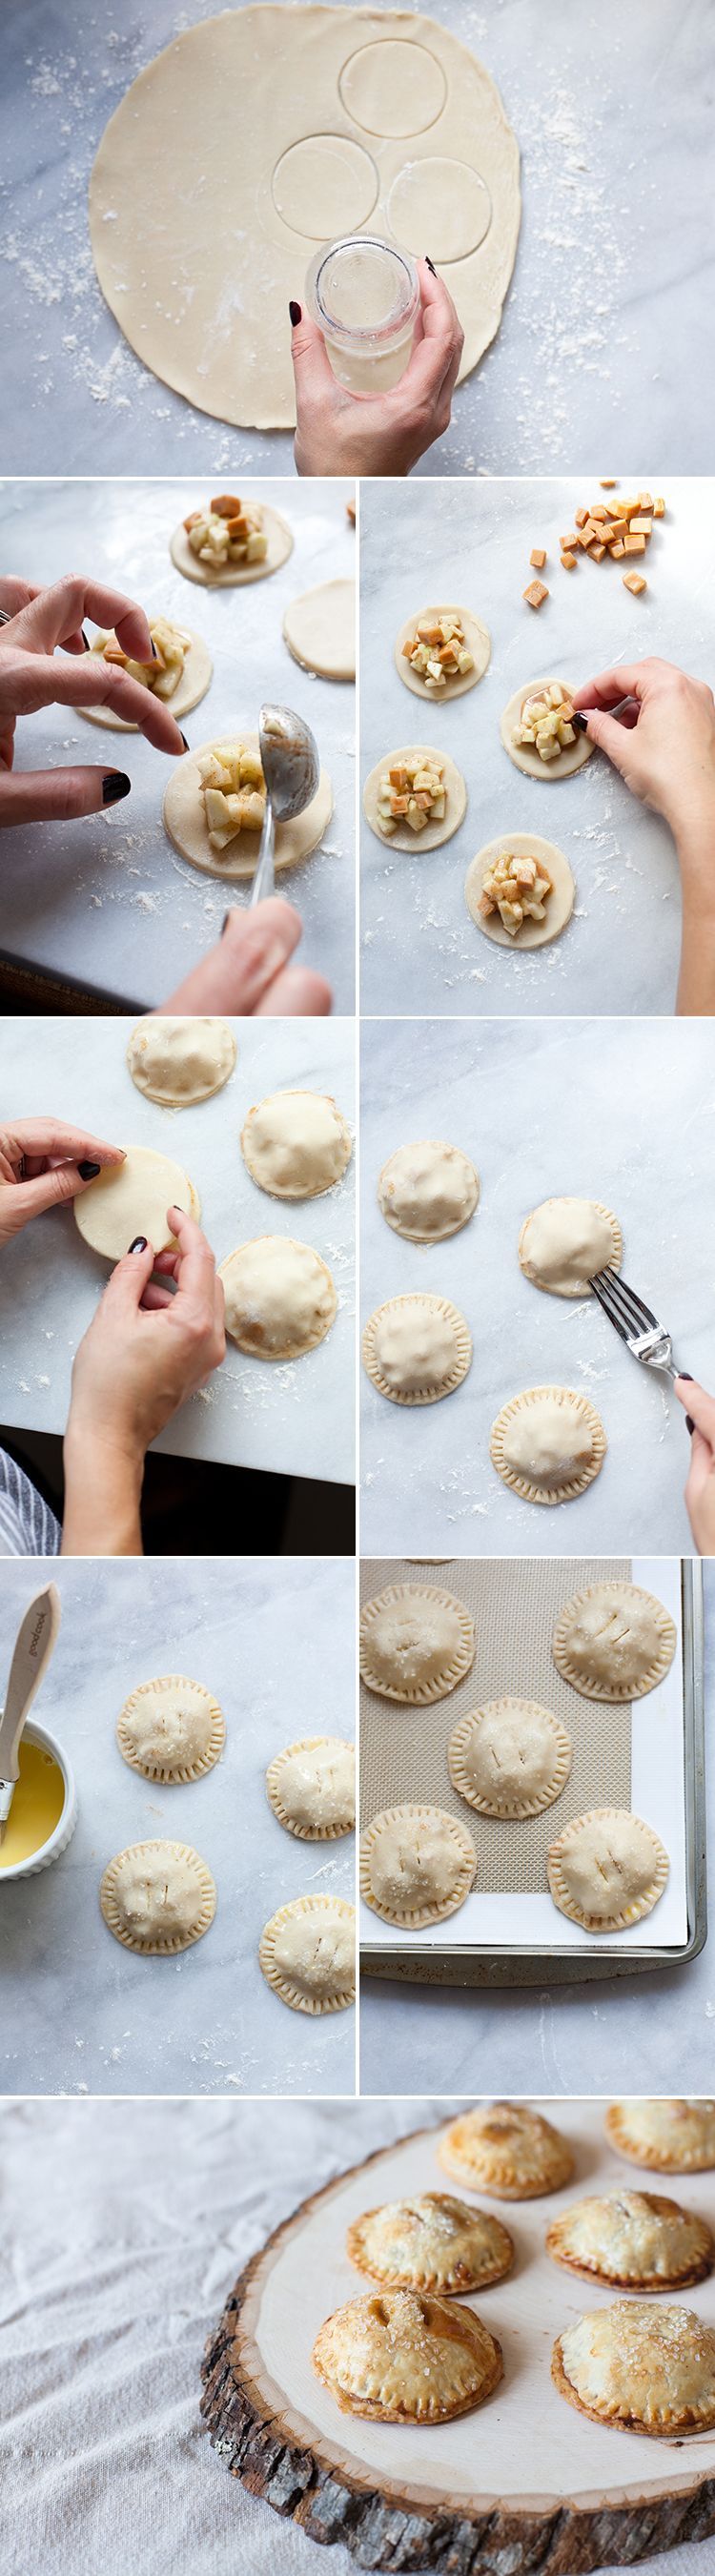 How to make mini hand pies- step by step instructions plus a recipe.